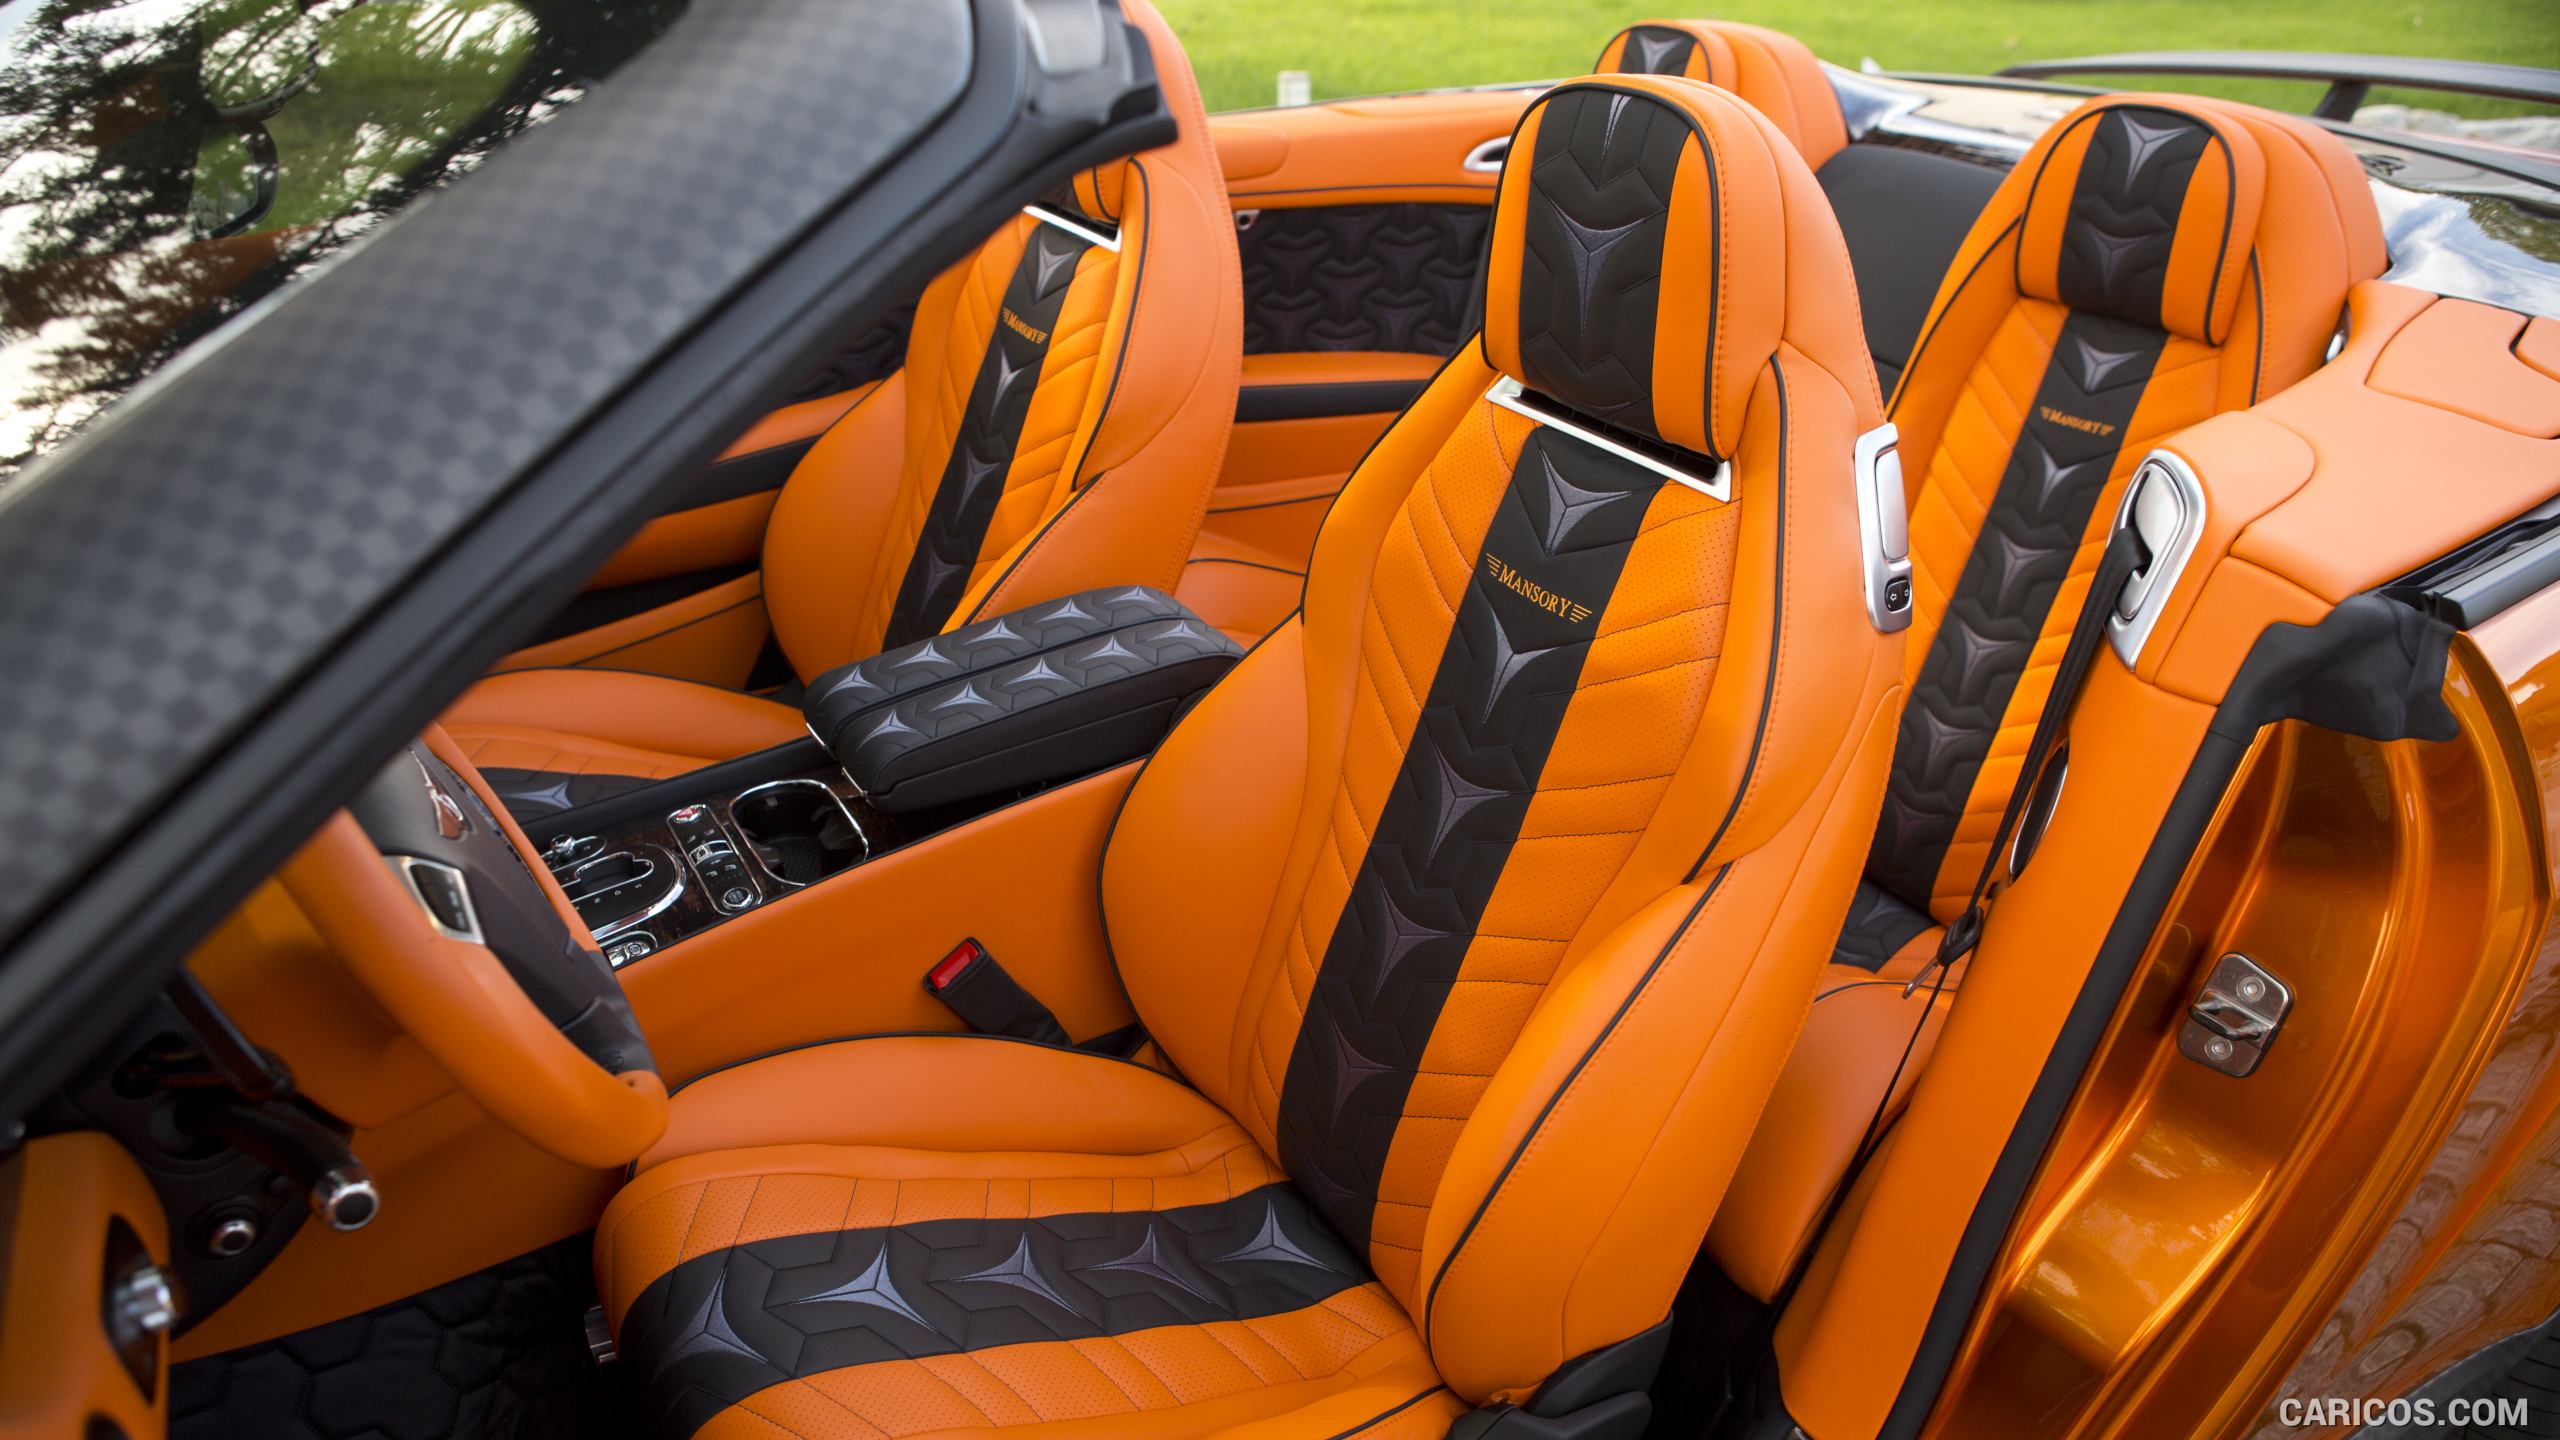 2016 MANSORY Bentley Continental GT Convertible - Interior, #12 of 13